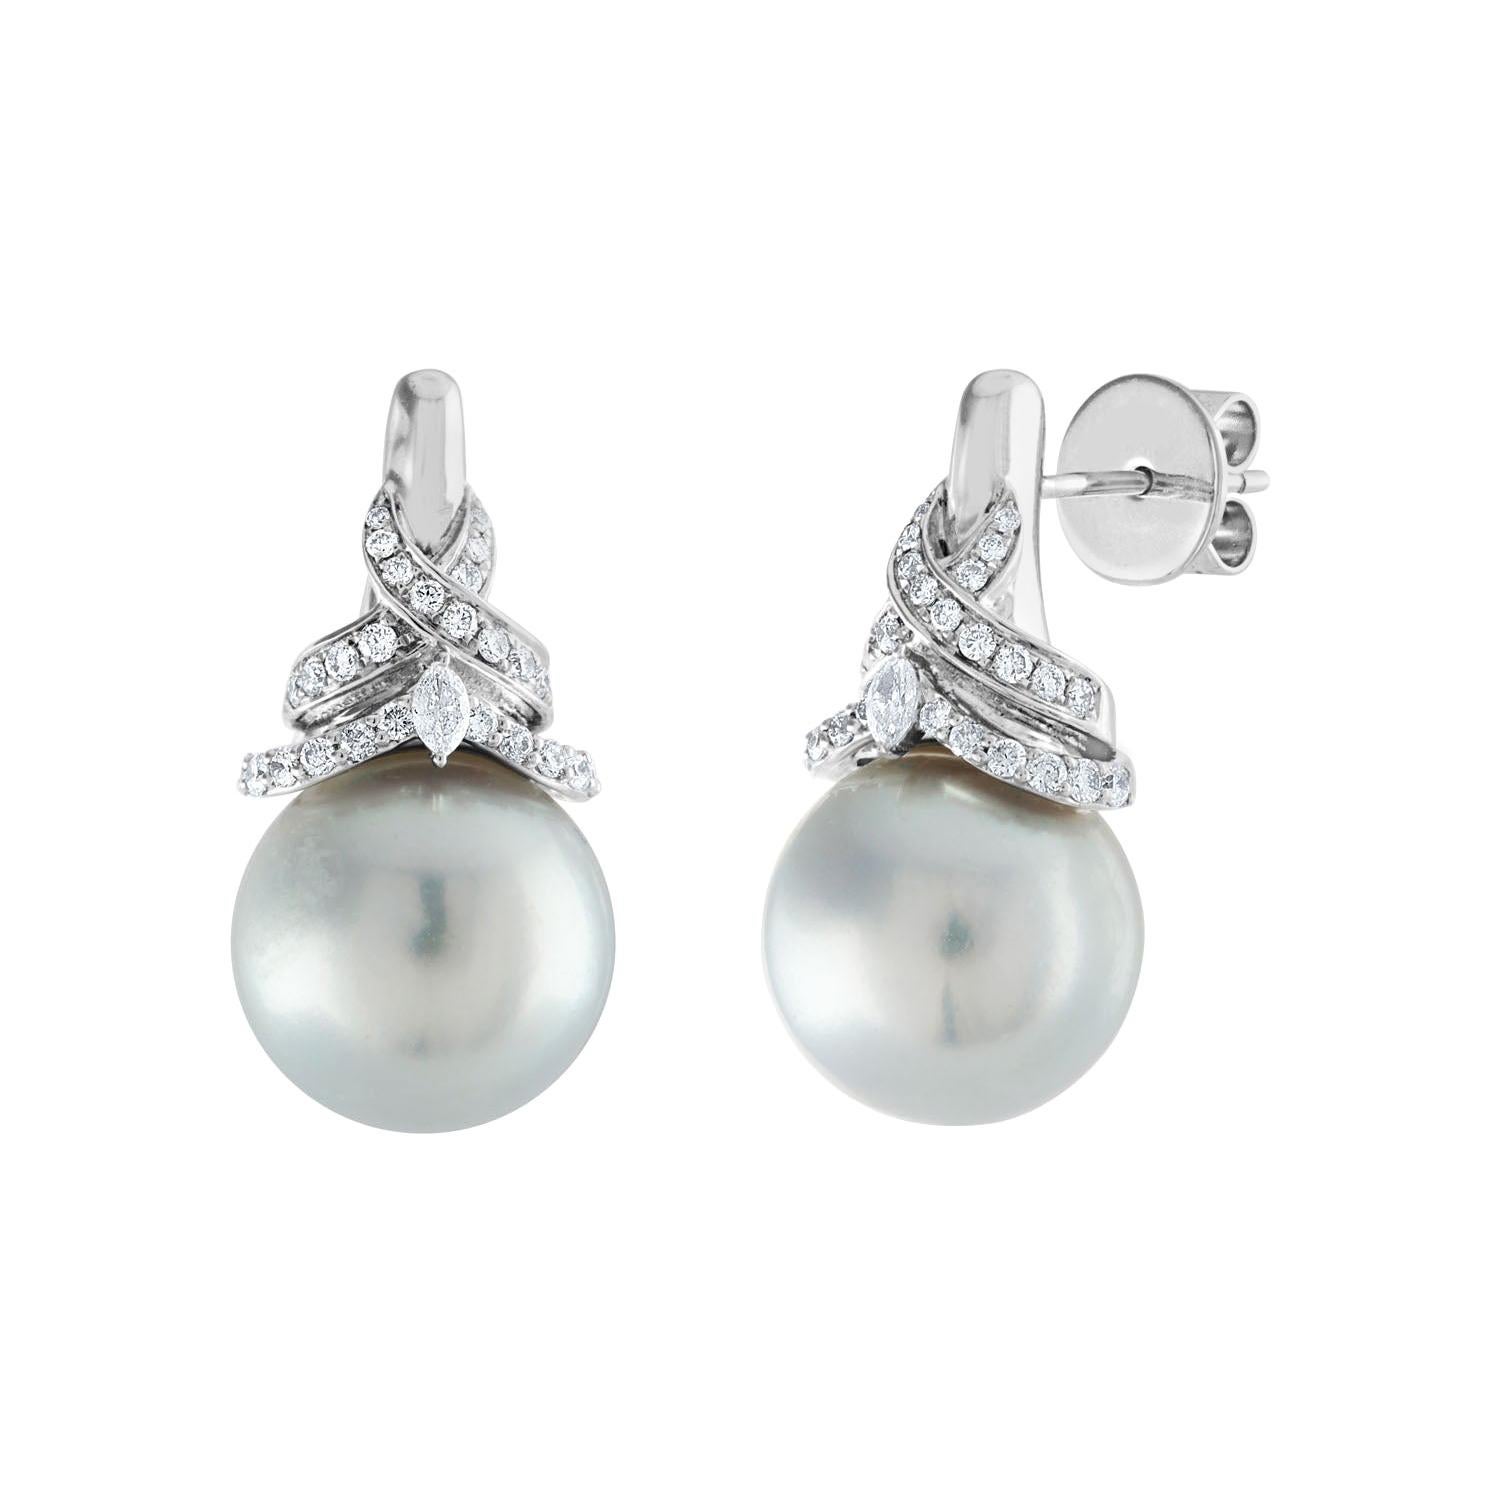 0.52 Carat Diamond and South Sea Pearls Gold Earrings For Sale